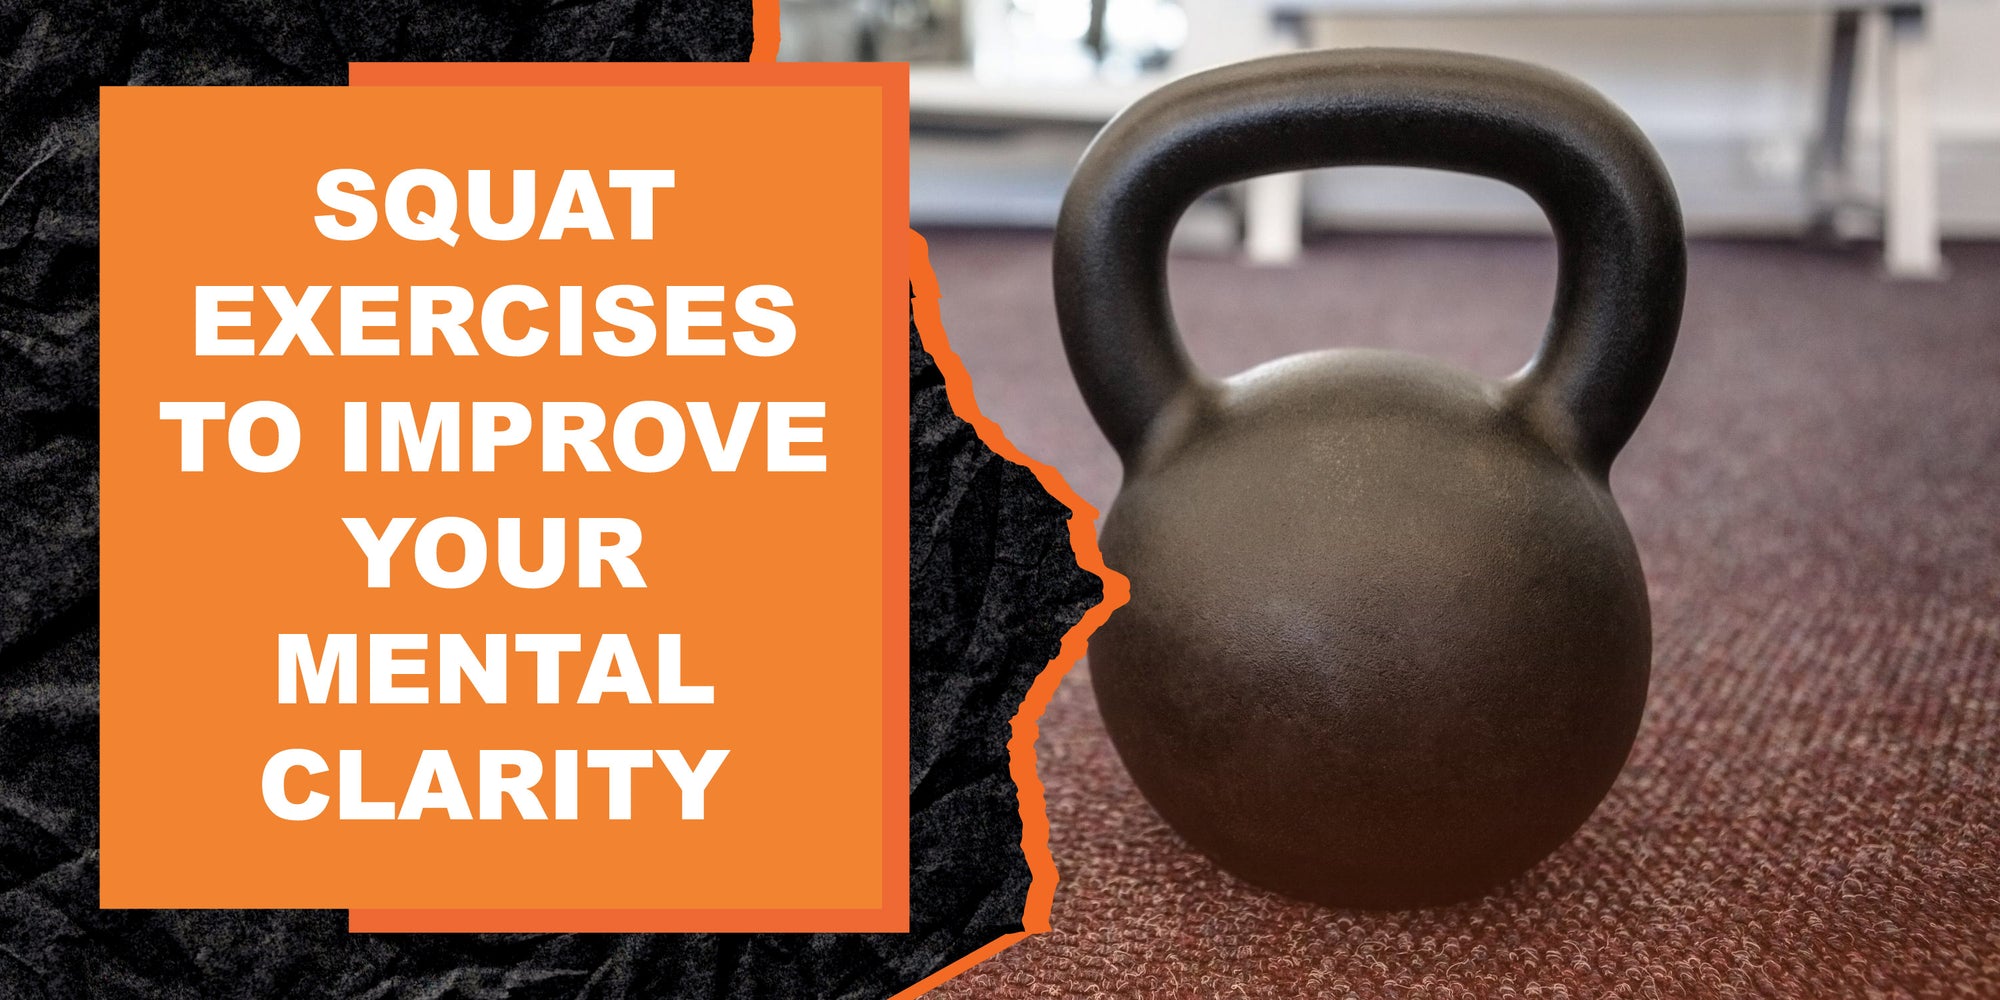 Squat Exercises to Improve Your Mental Clarity